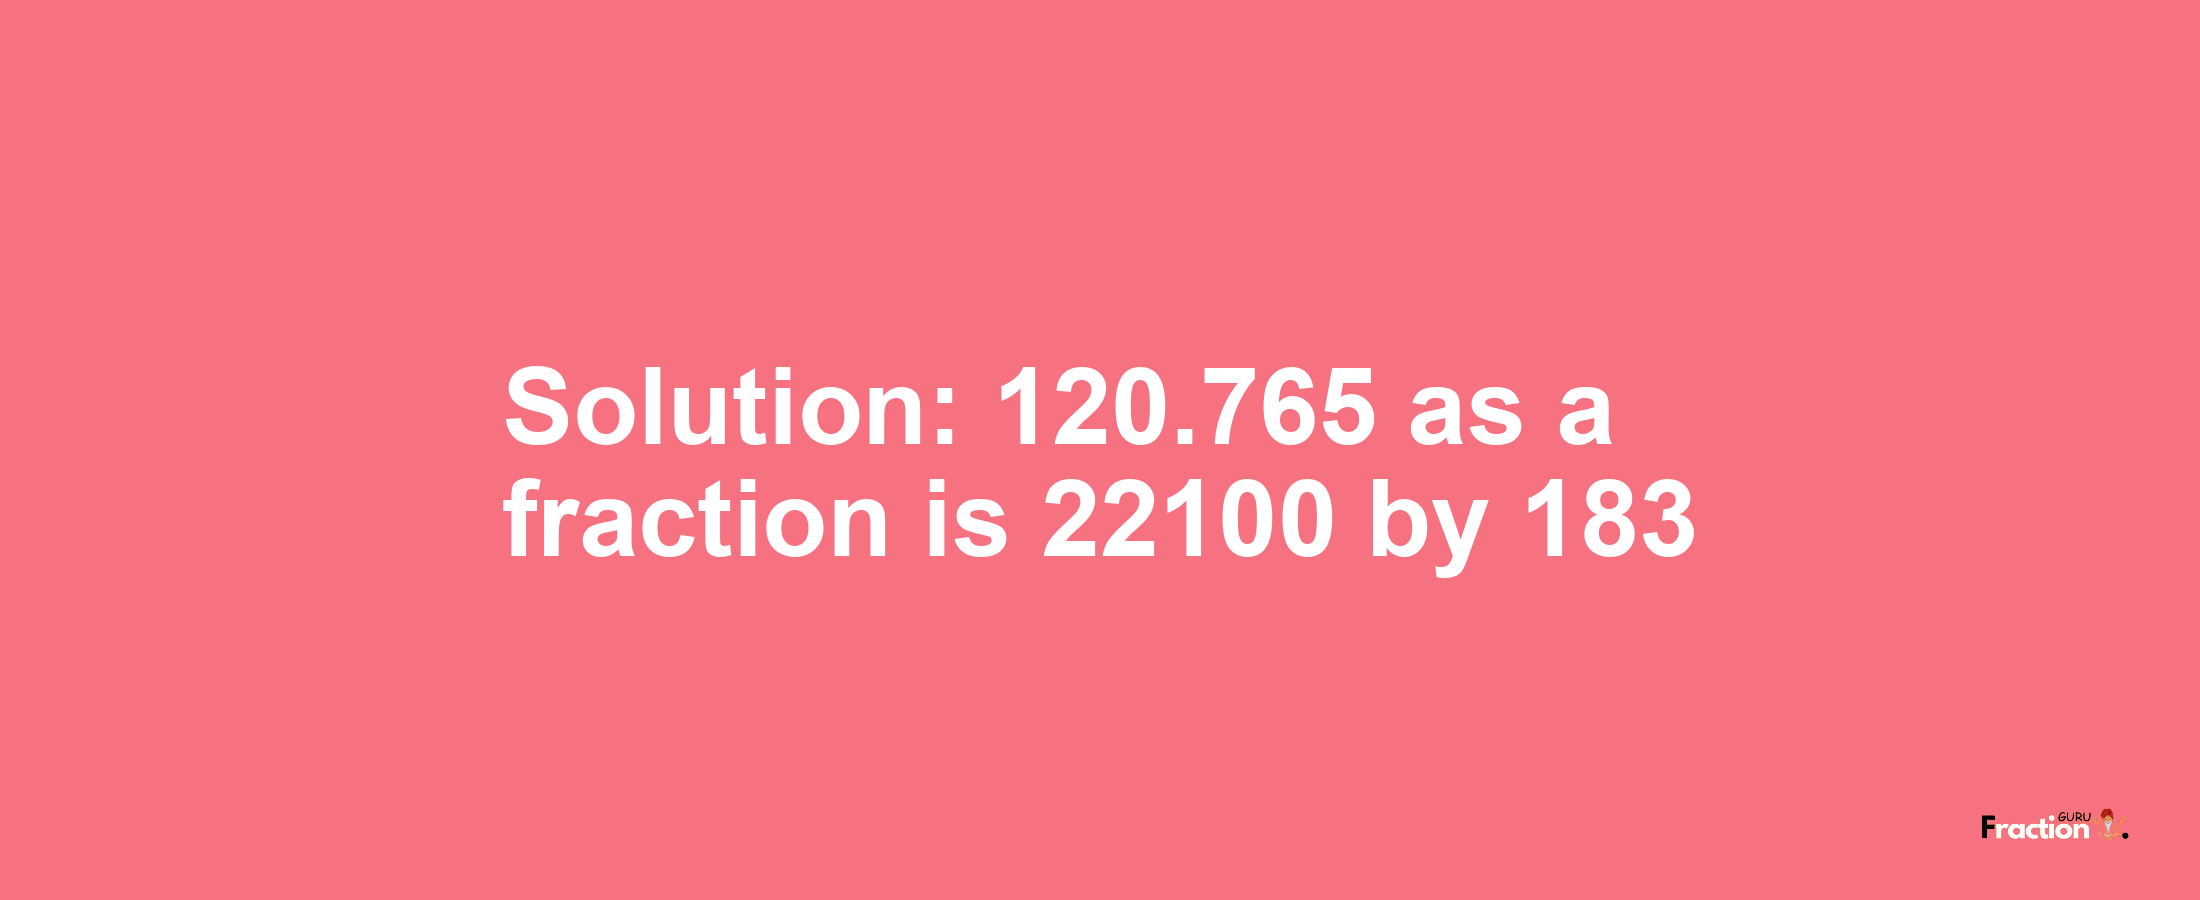 Solution:120.765 as a fraction is 22100/183